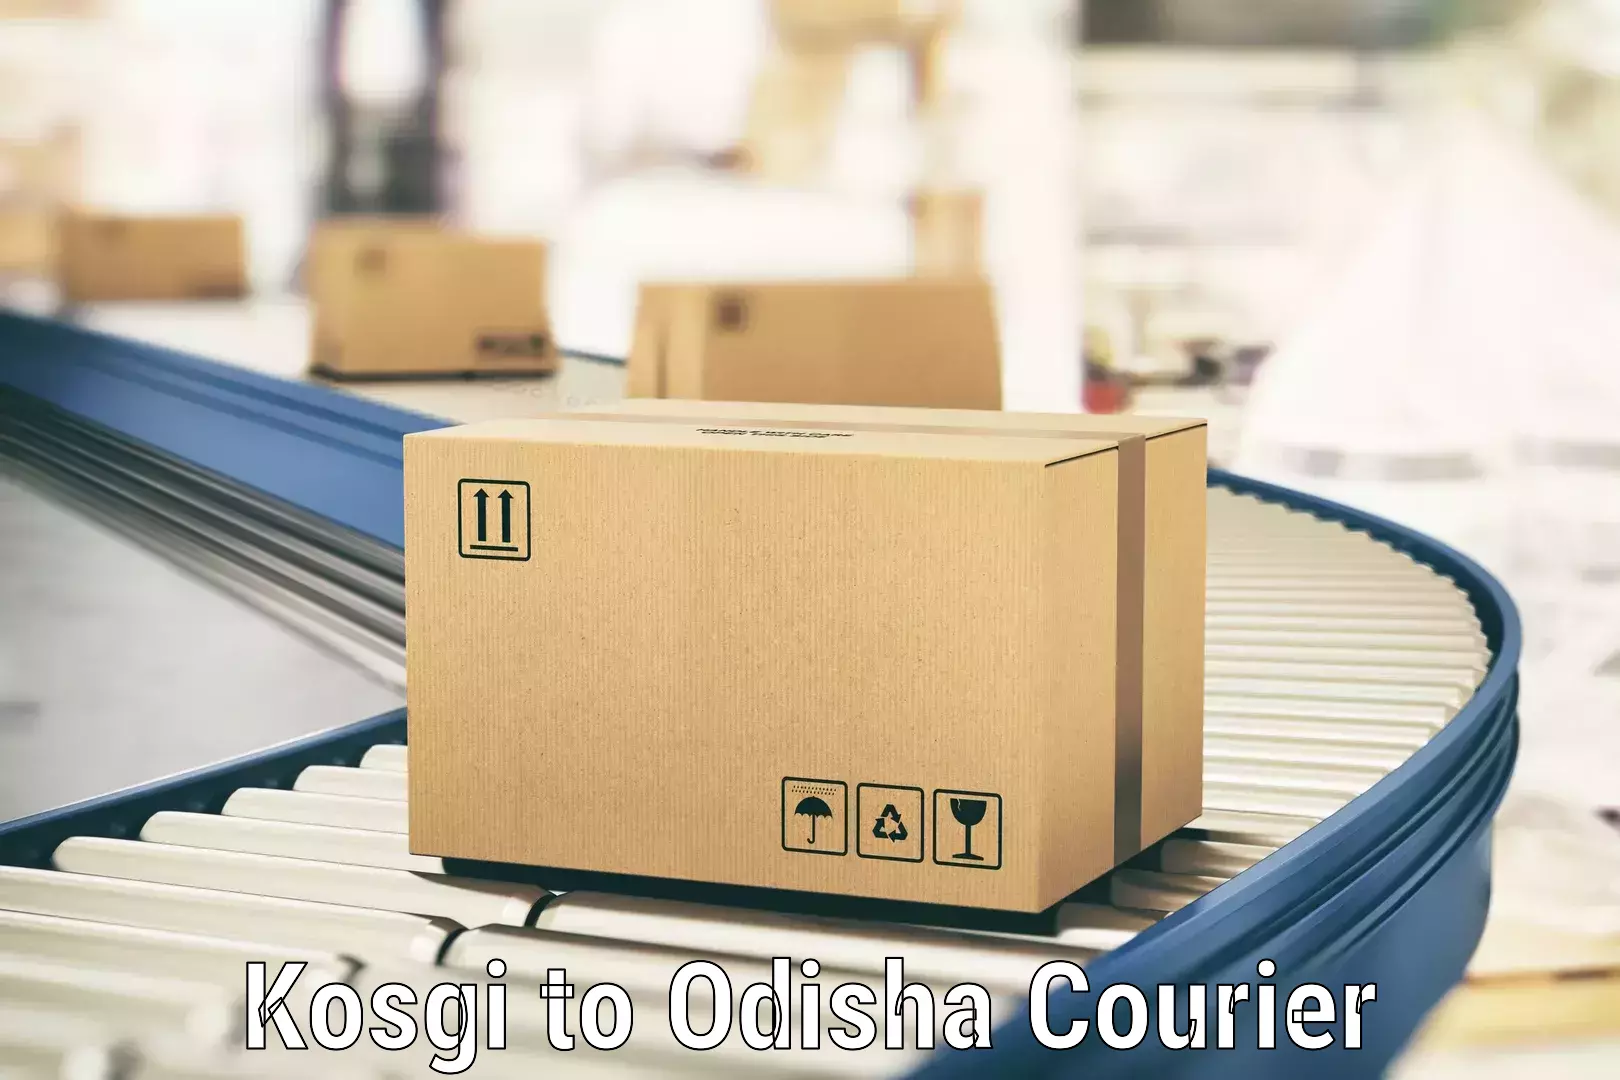 Global freight services Kosgi to Cuttack